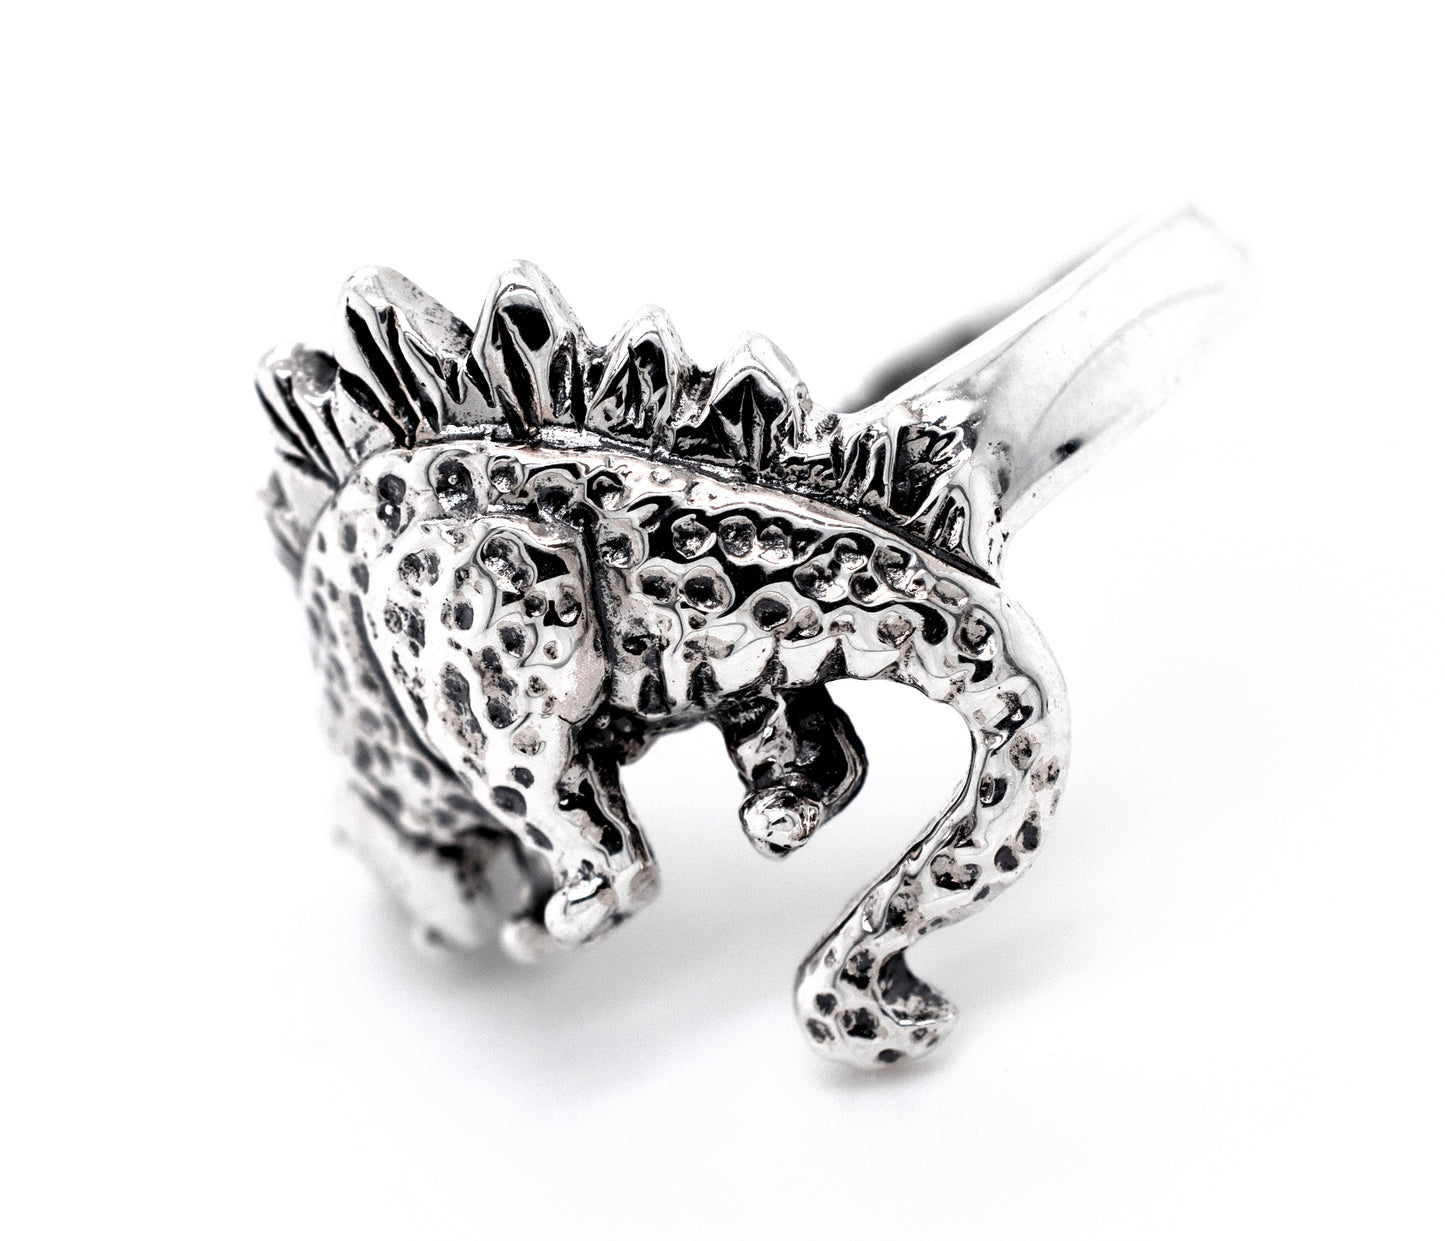 A Super Silver Stegosaurus Ring, perfect for dinosaur lovers.